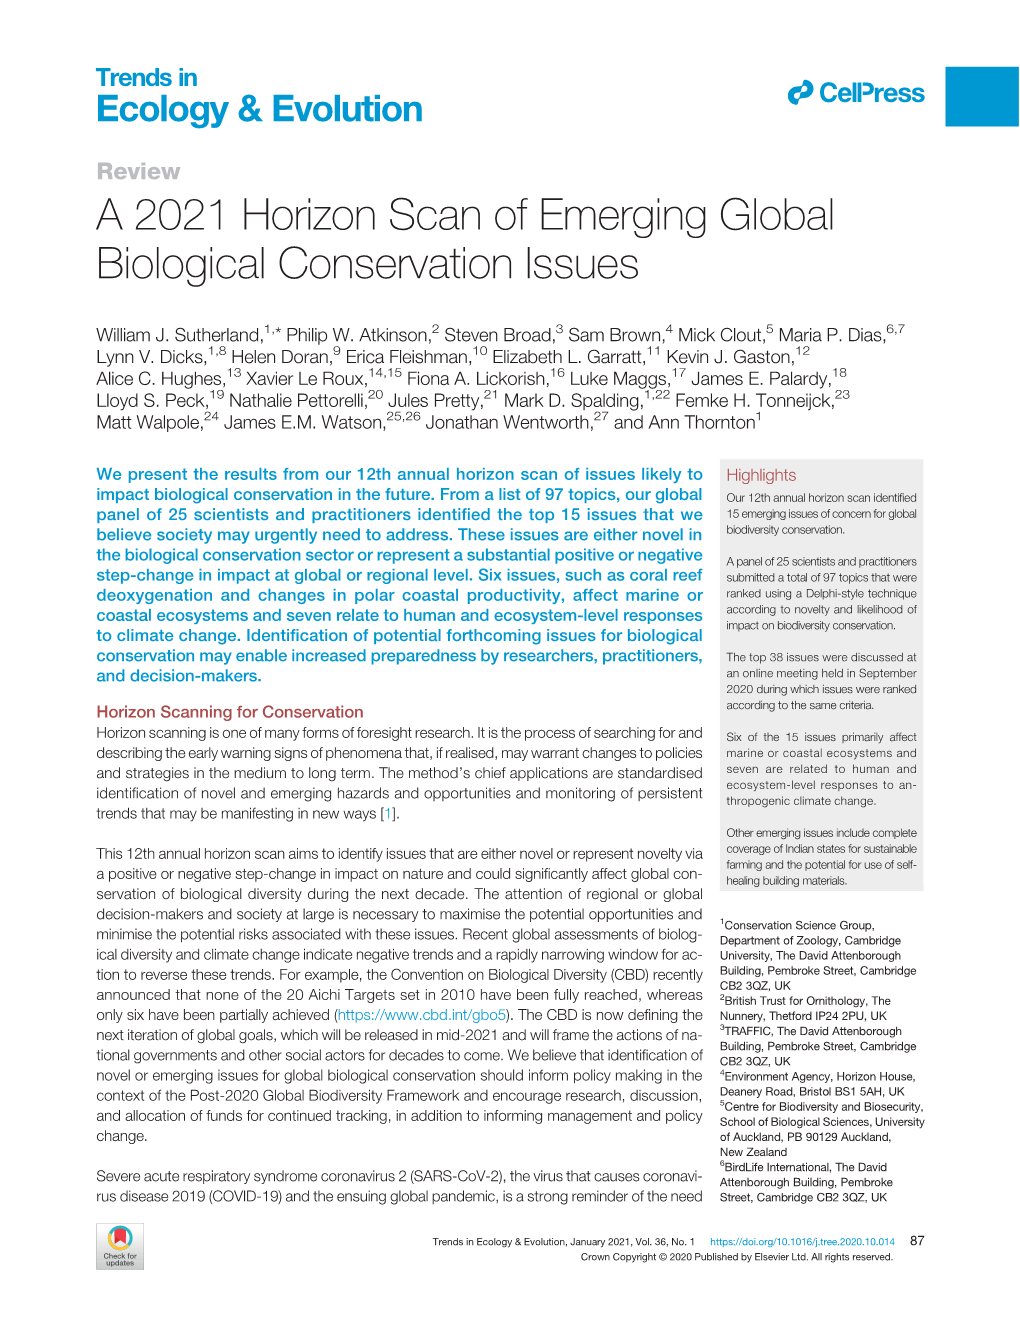 A 2021 Horizon Scan of Emerging Global Biological Conservation Issues